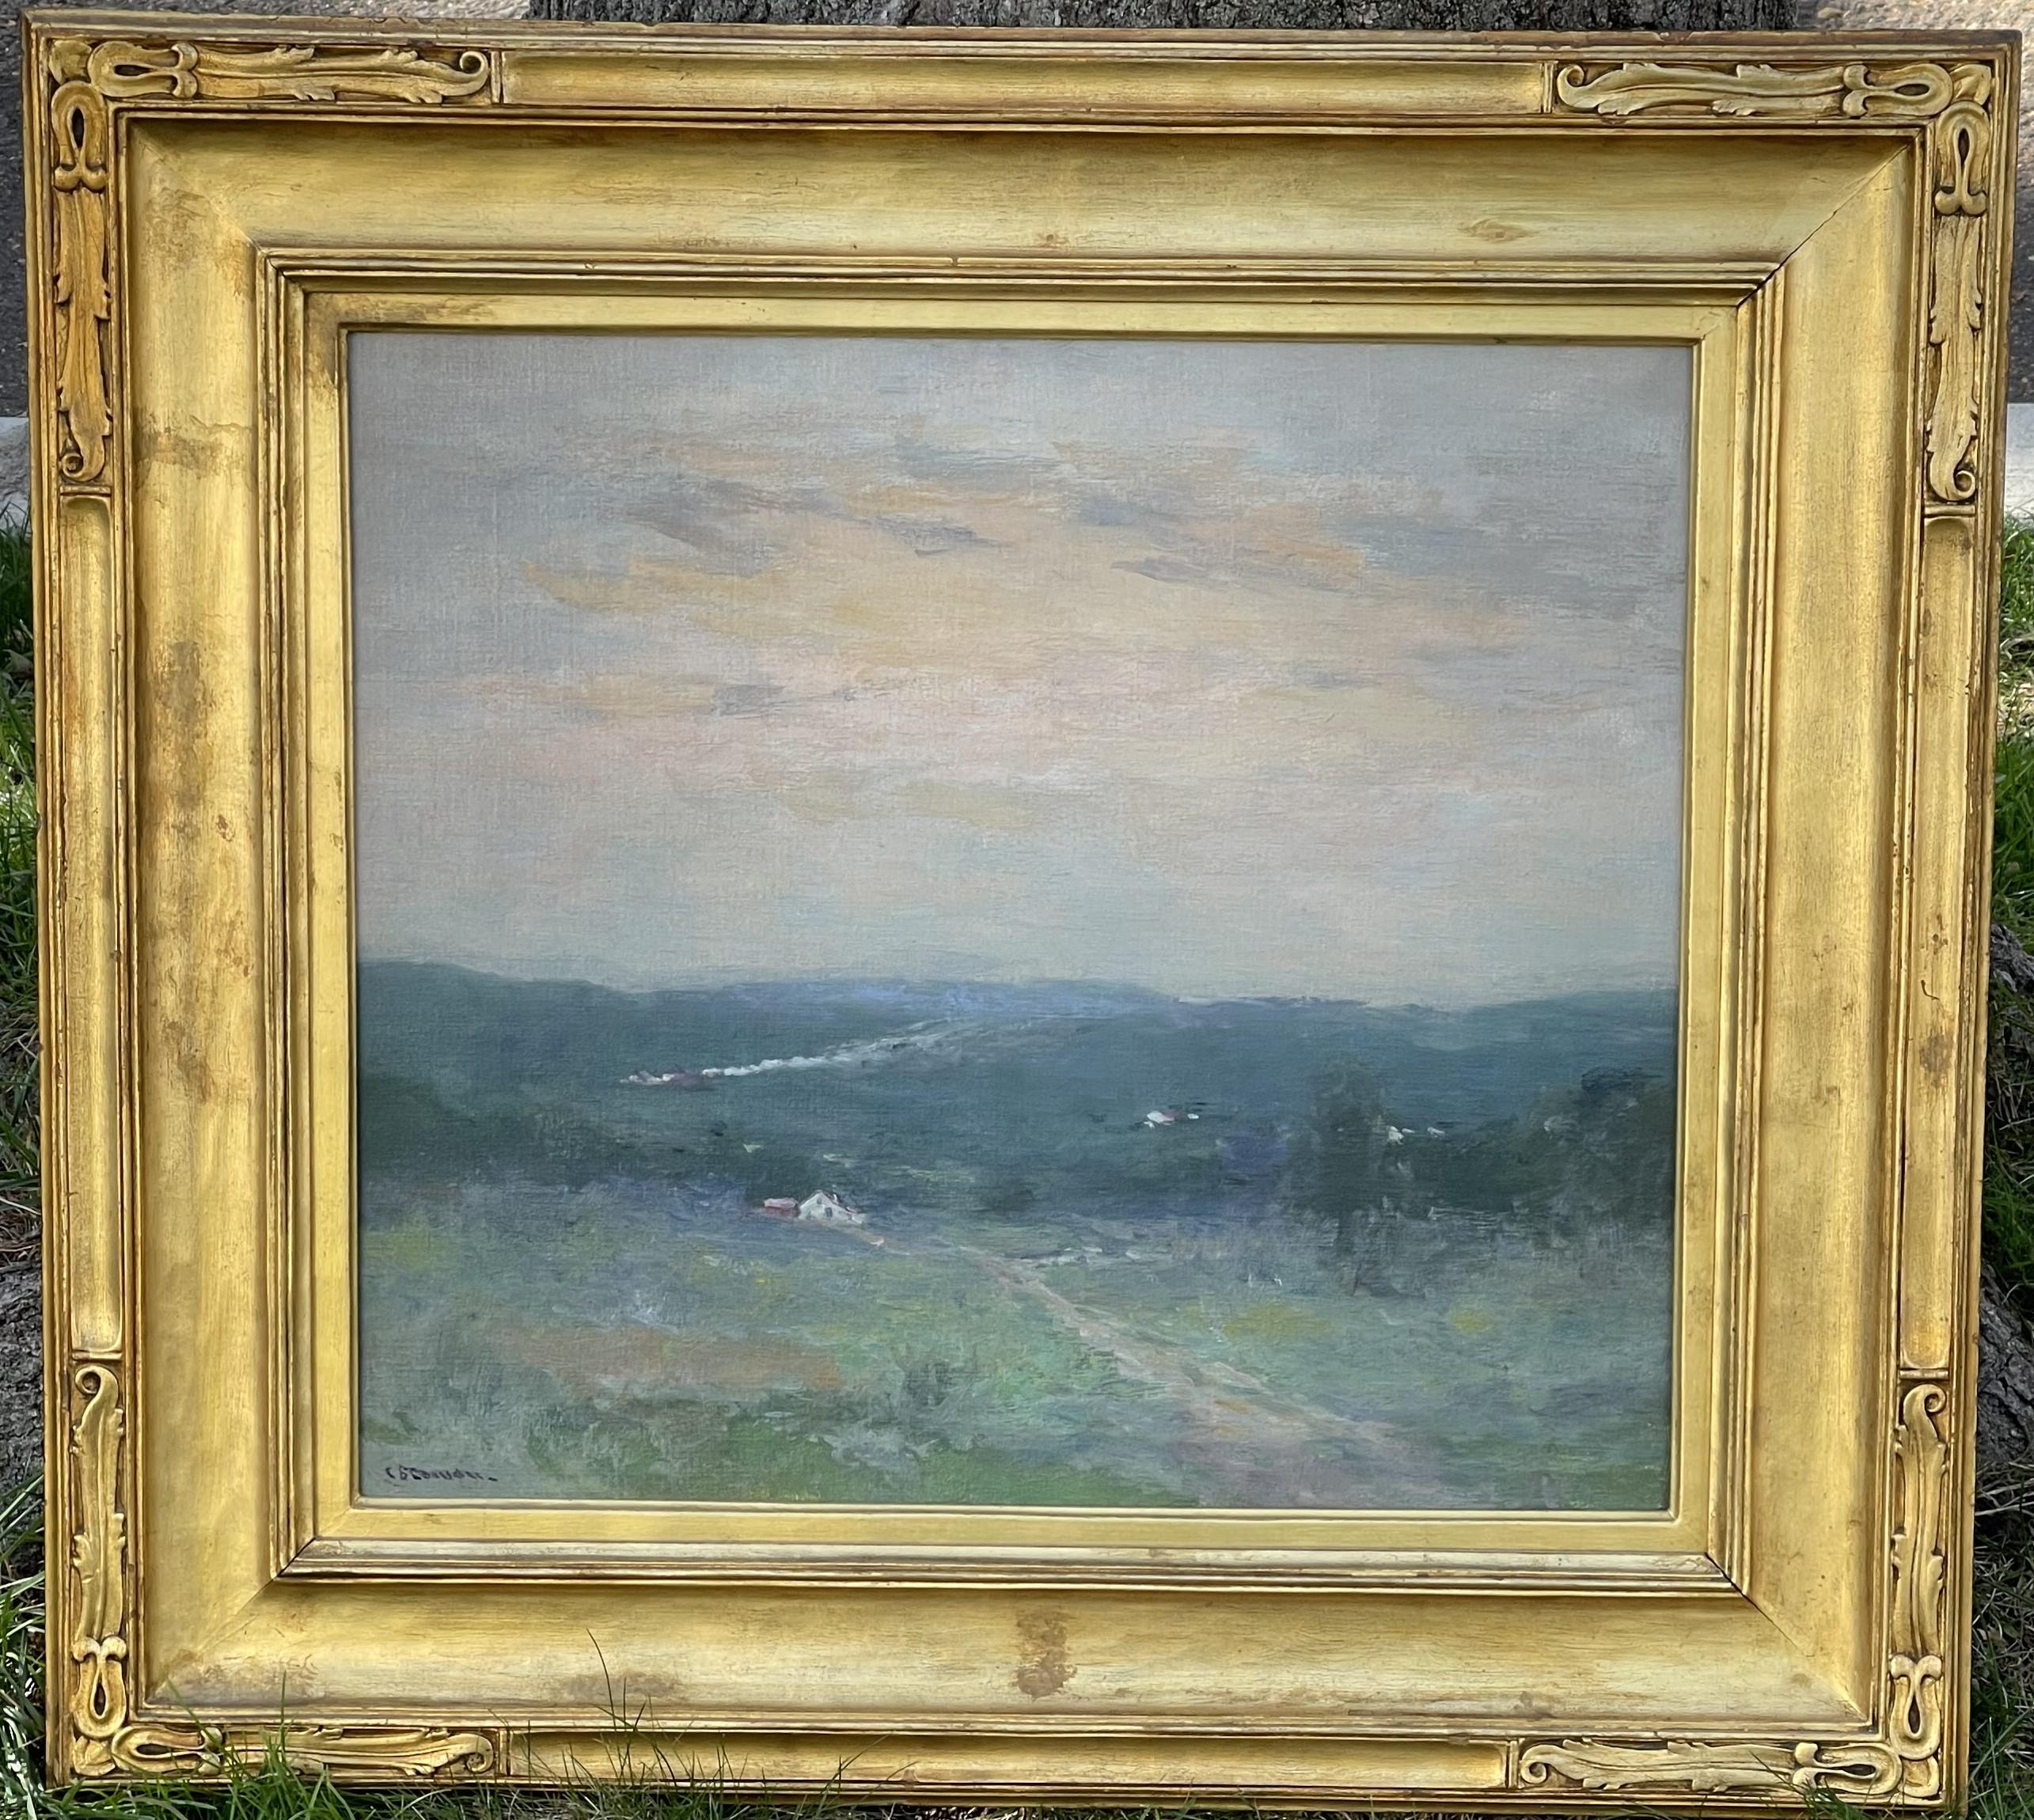 Untitled, Bucolic Landscape - Painting by Charlotte Buell Coman